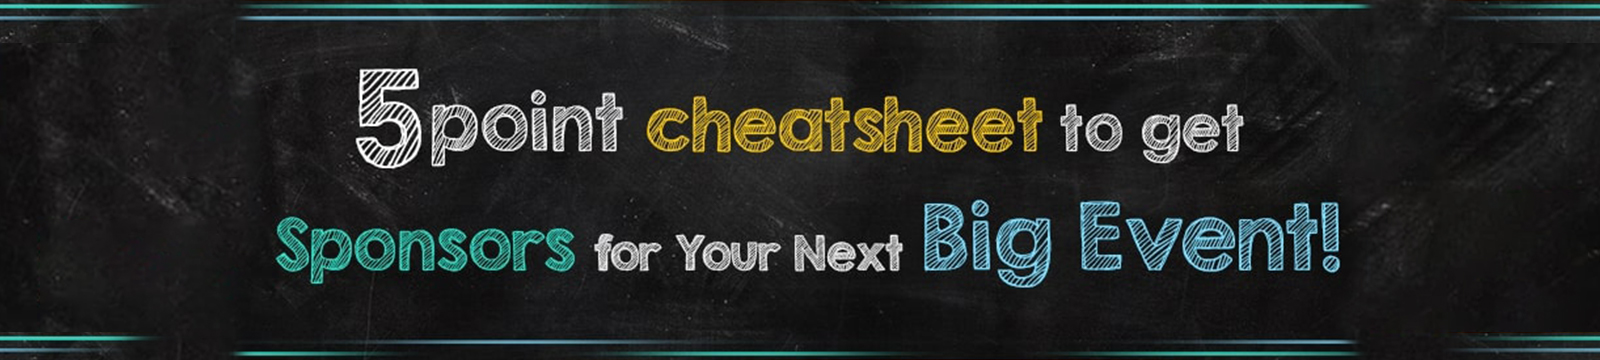 A 5-point Cheatsheet to get Sponsors for Your Next Big Event!